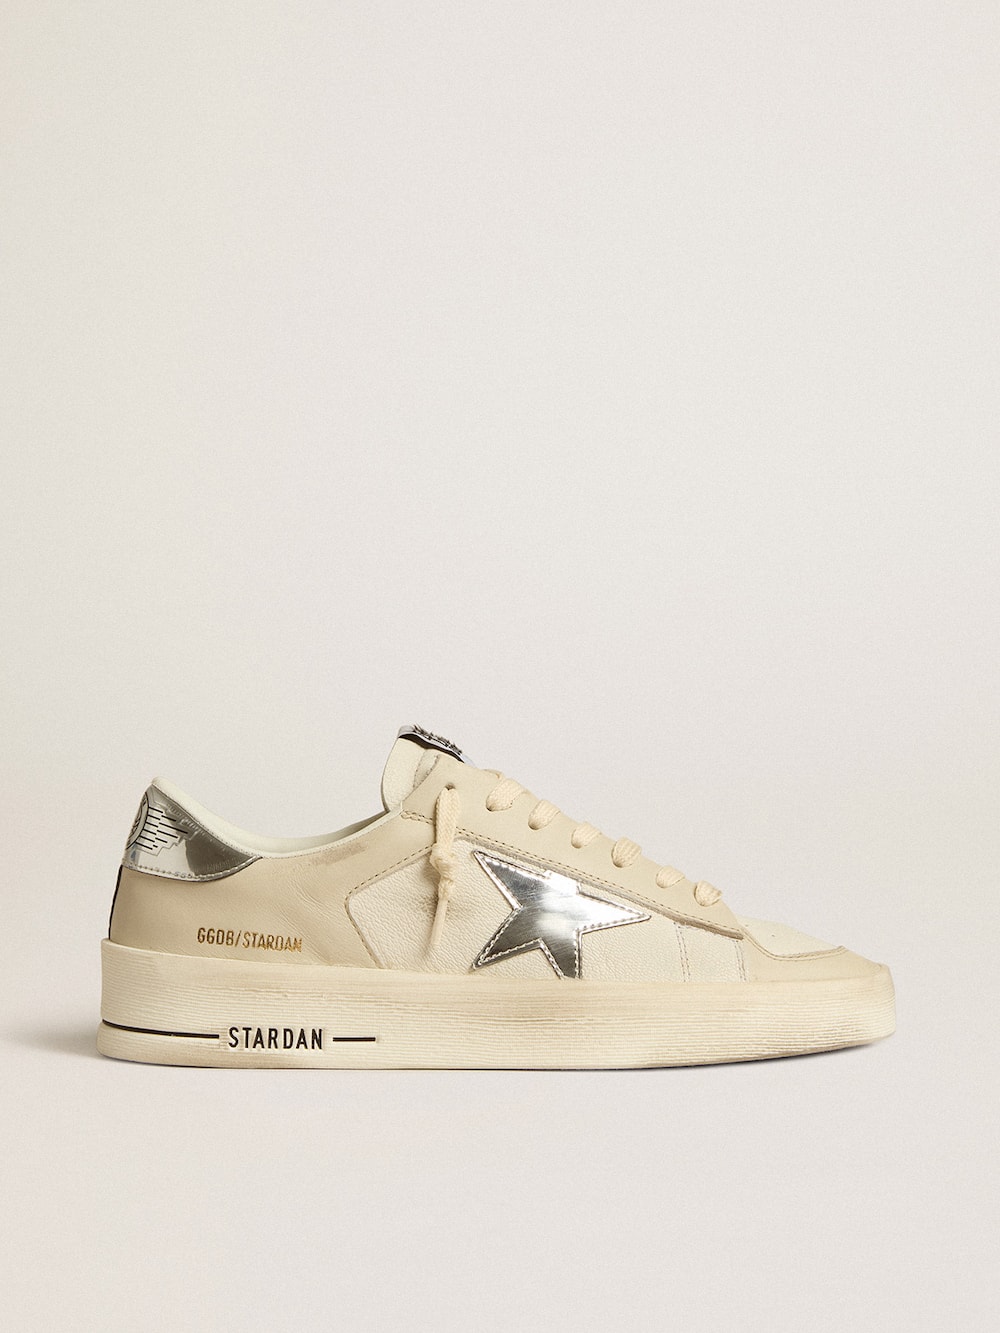 Golden Goose - Stardan in nappa with silver mirror-effect star and heel tab in 